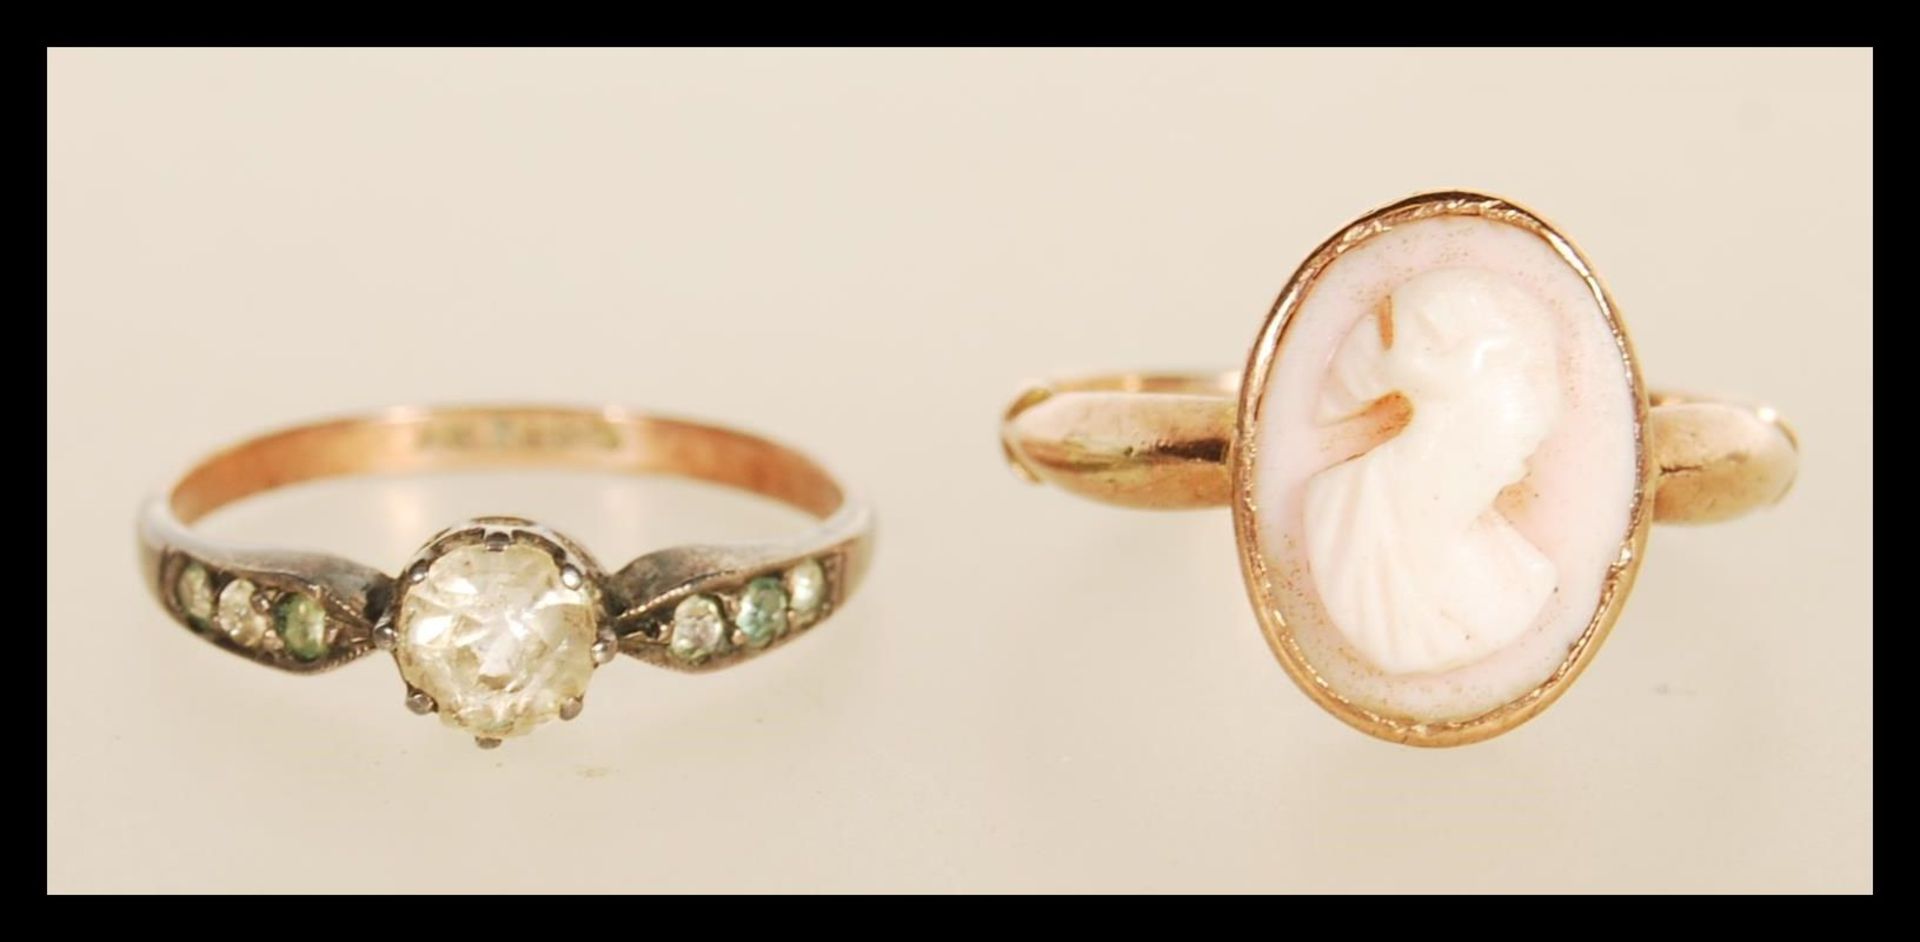 A hallmarked 9ct gold ring set with a pink and white stone oval cameo, hallmarked Birmingham 1967 (